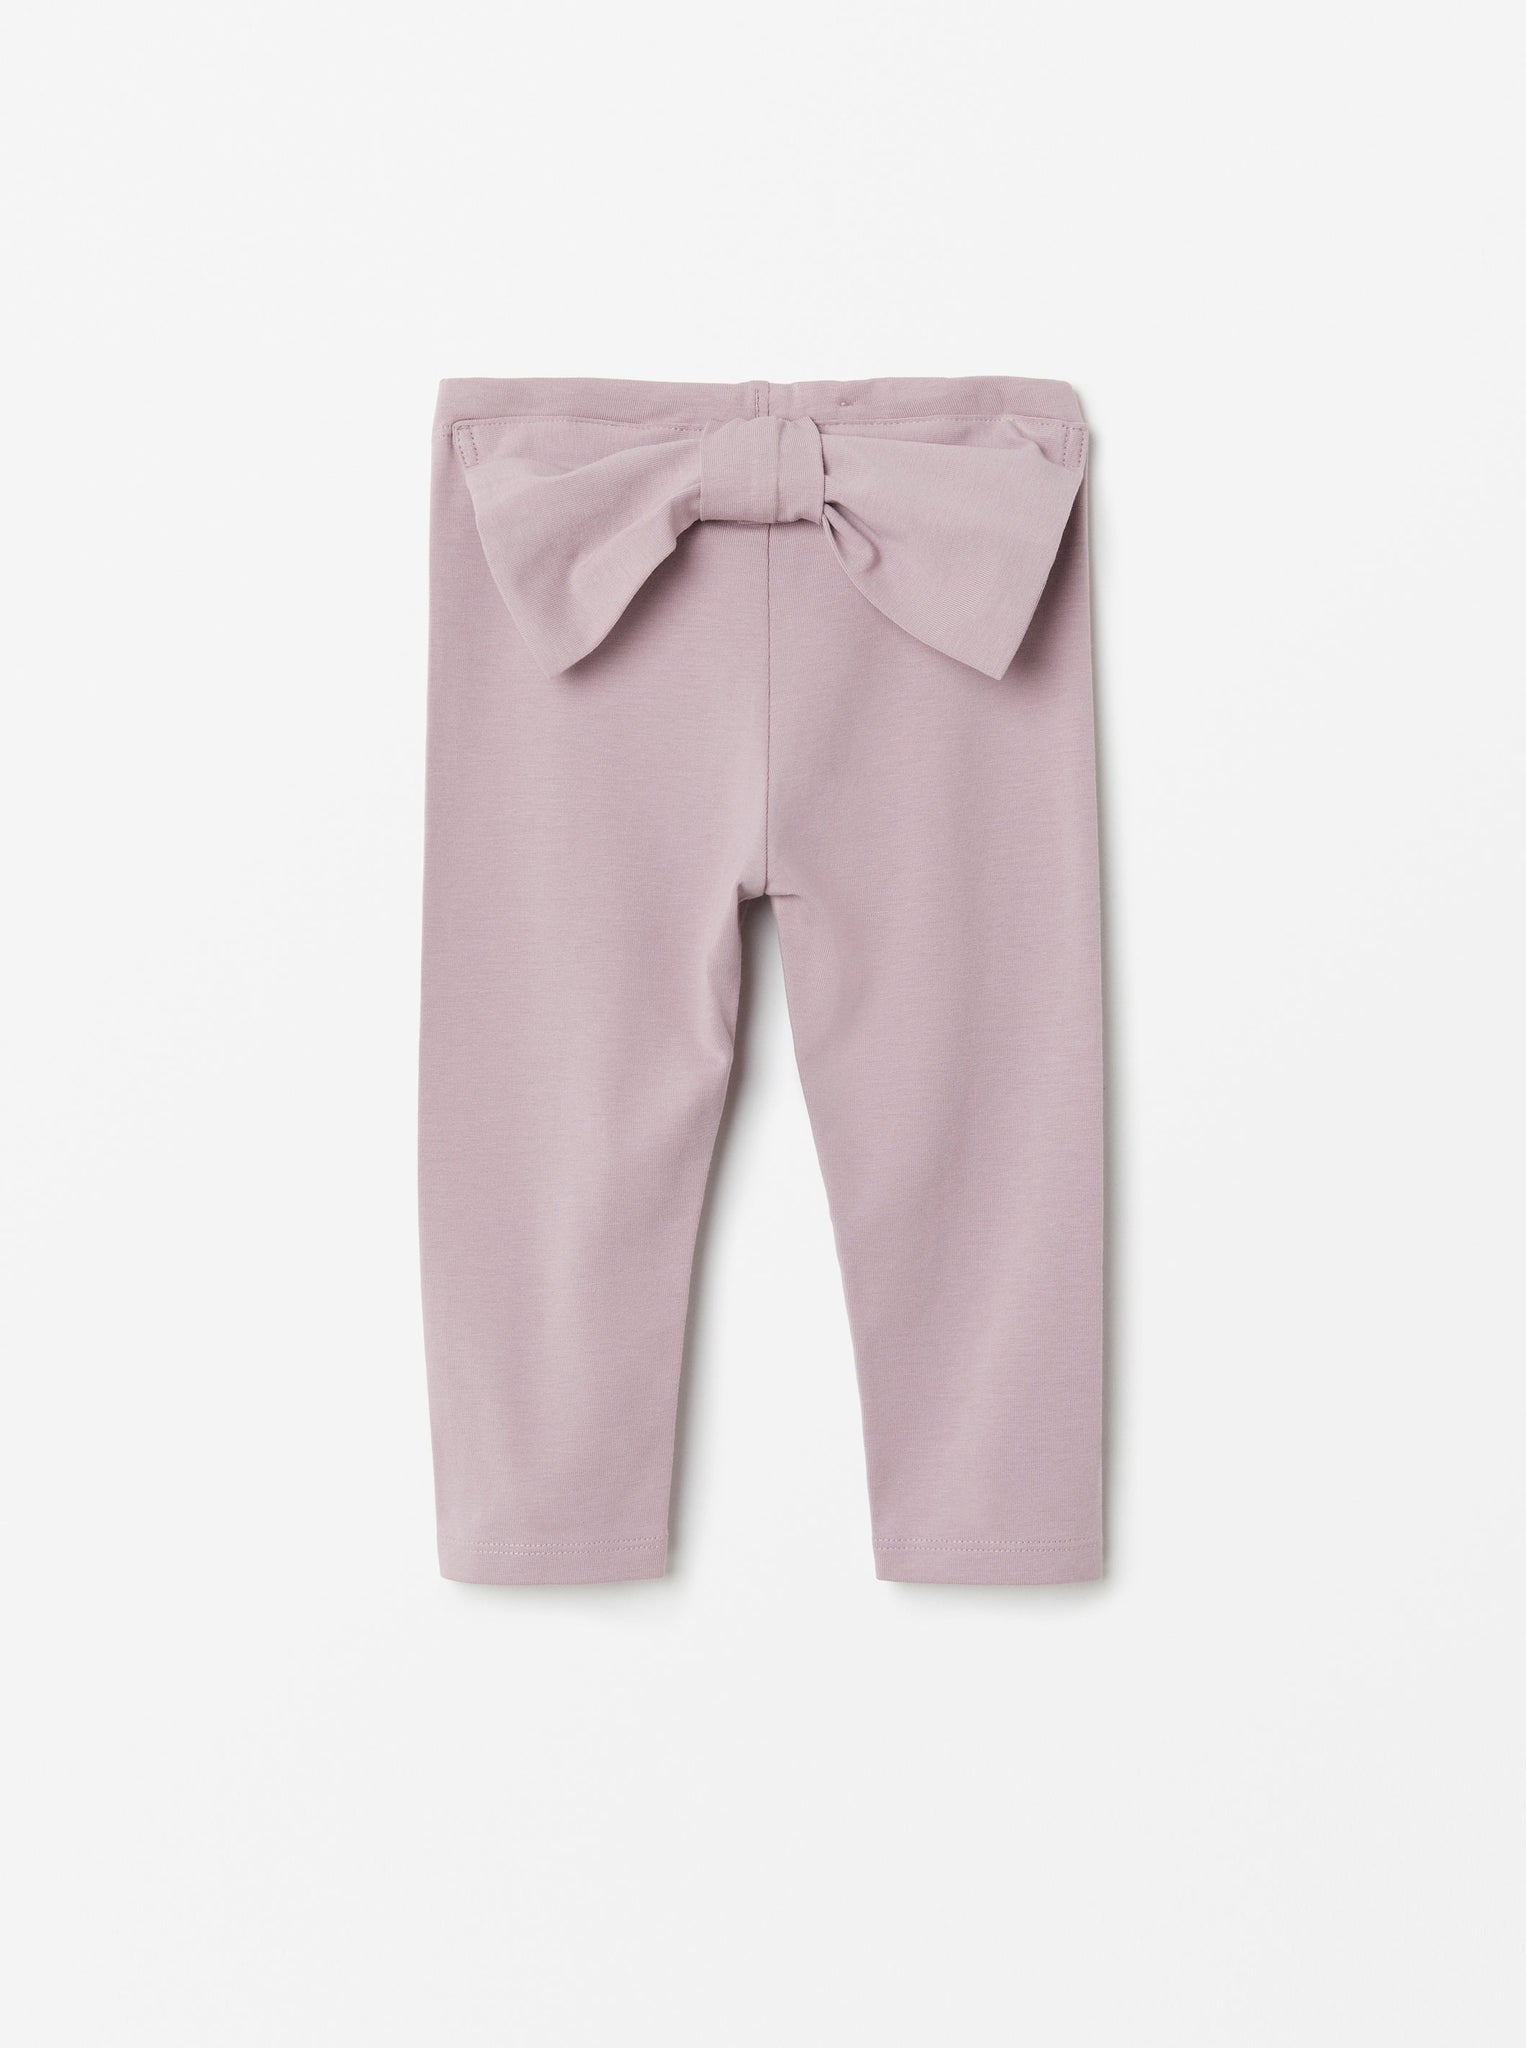 Ruffled Cotton Pink Baby Leggings from the Polarn O. Pyret babywear collection. Nordic baby clothes made from sustainable sources.